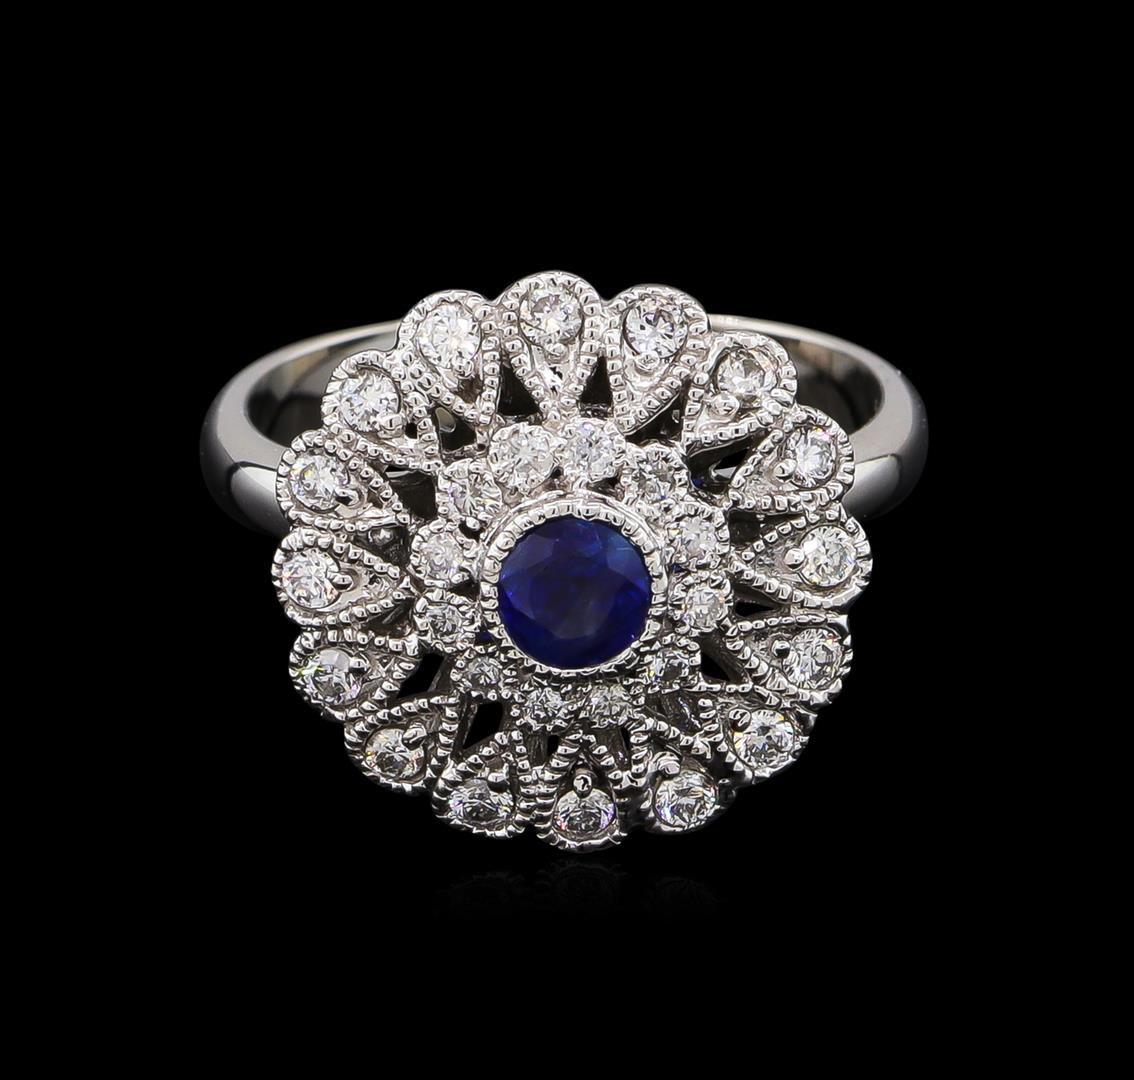 0.44 ctw Blue Sapphire and Diamond Ring - 14KT White Gold